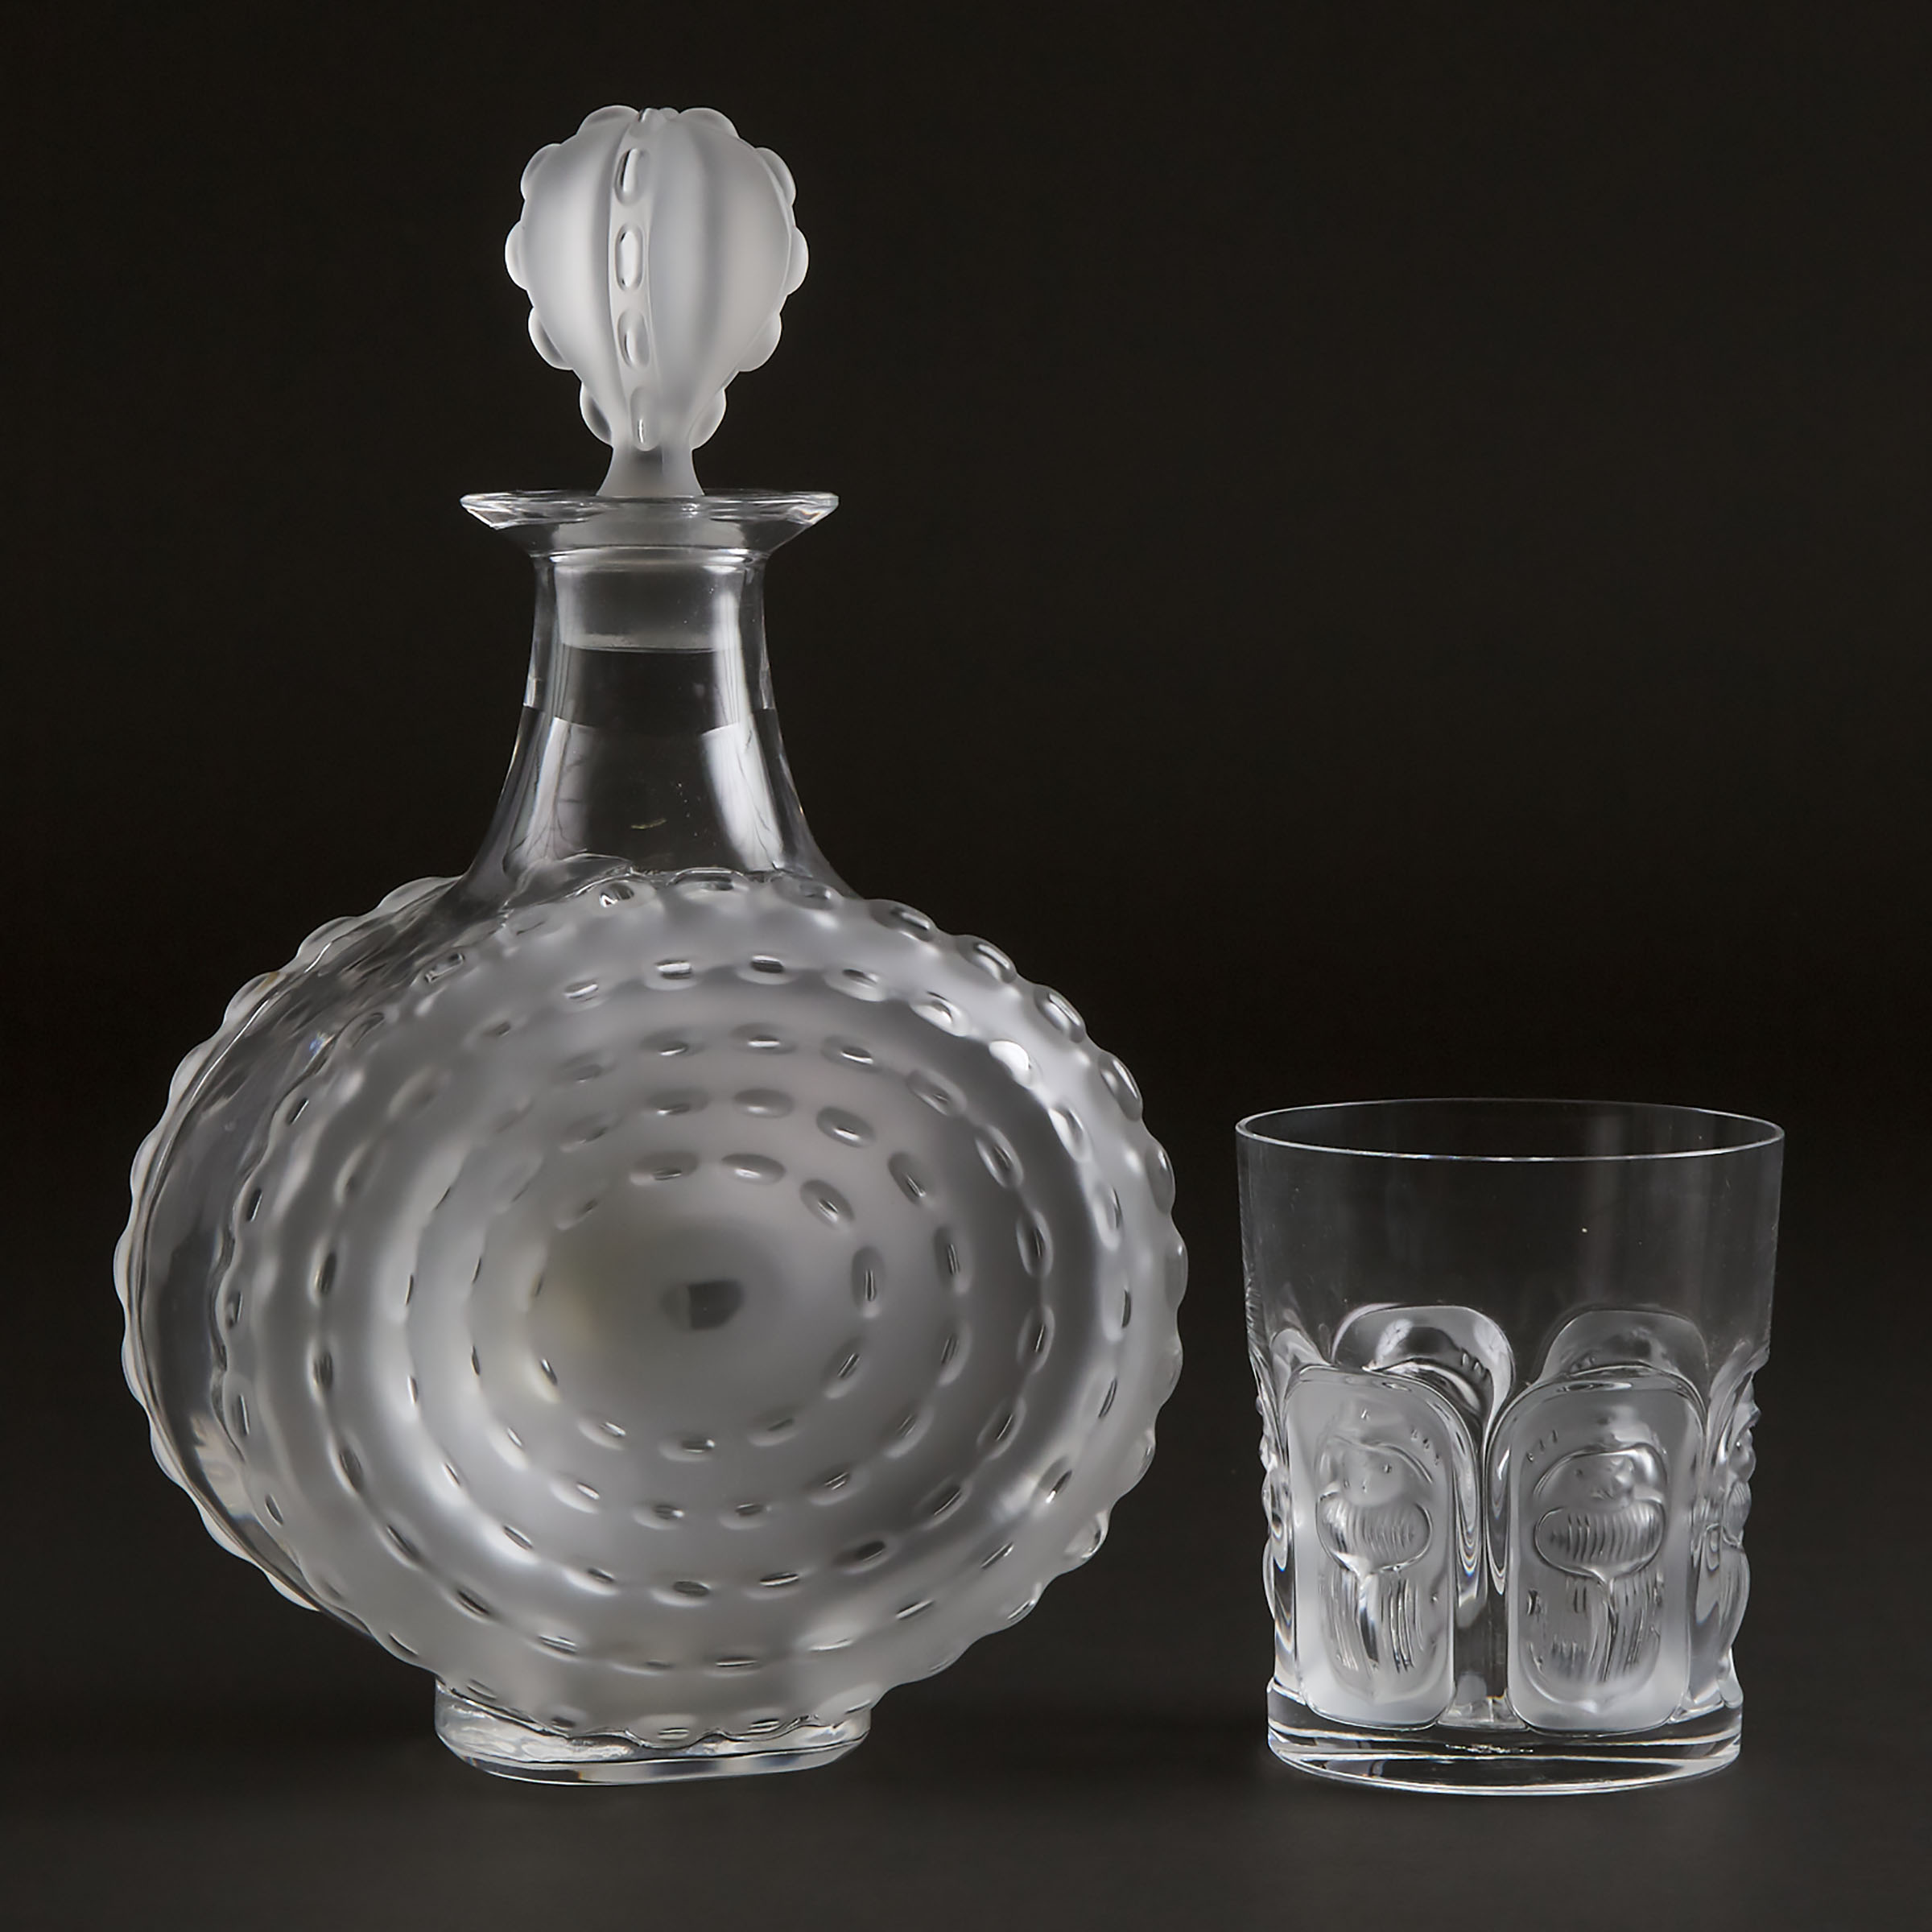 'Khepri', Lalique Moulded and Partly Frosted Glass Tumbler, and a Decanter with Stopper, post-1945